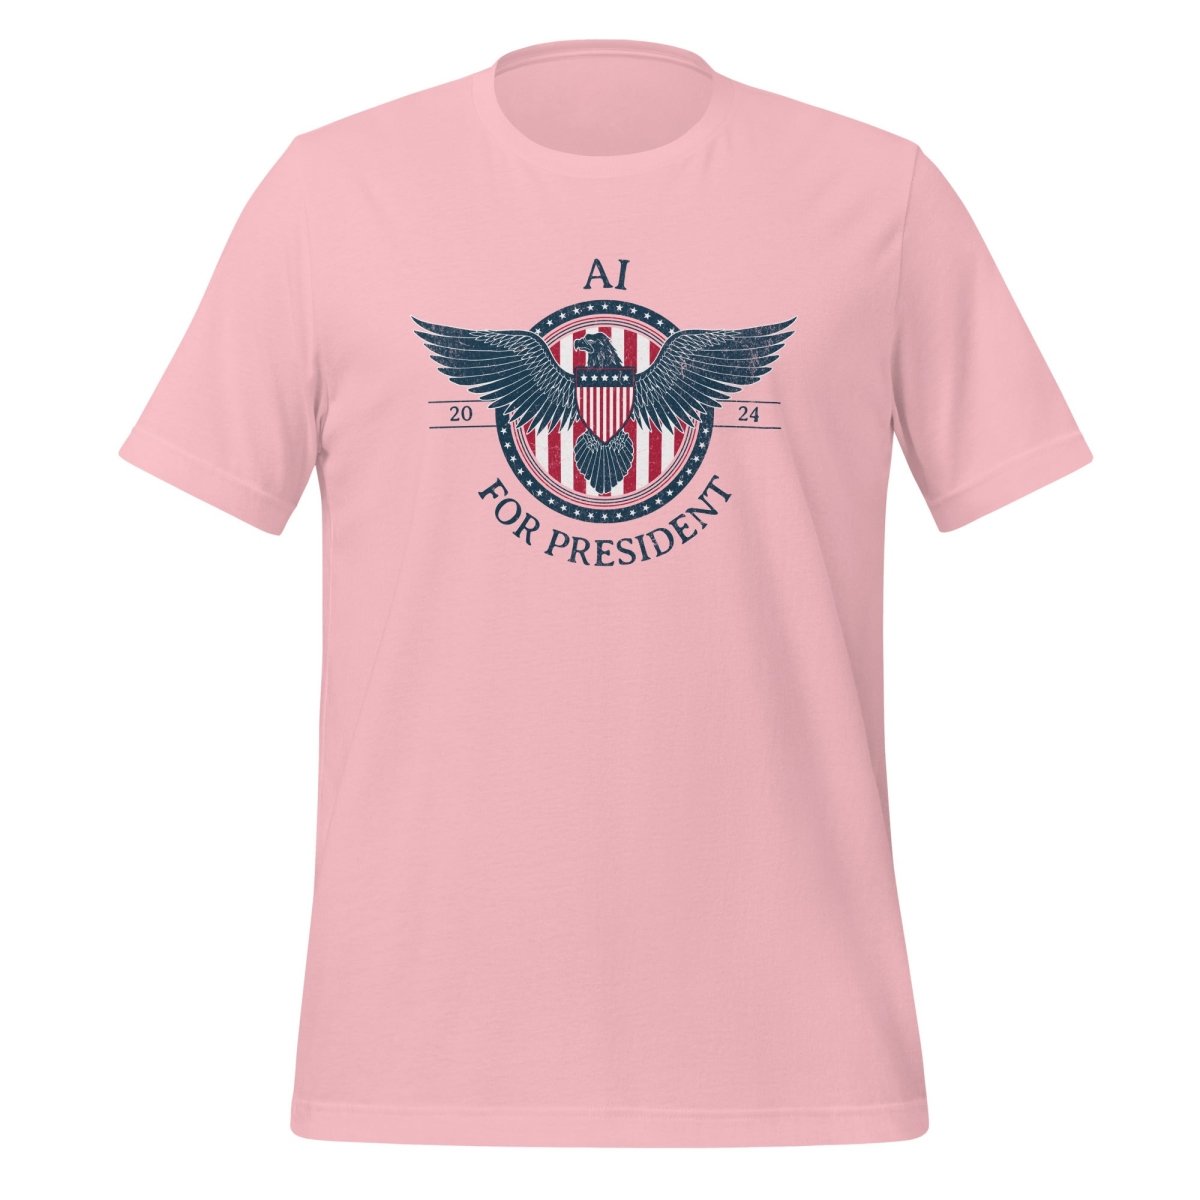 AI for President 2024 T - Shirt (unisex) - Pink - AI Store